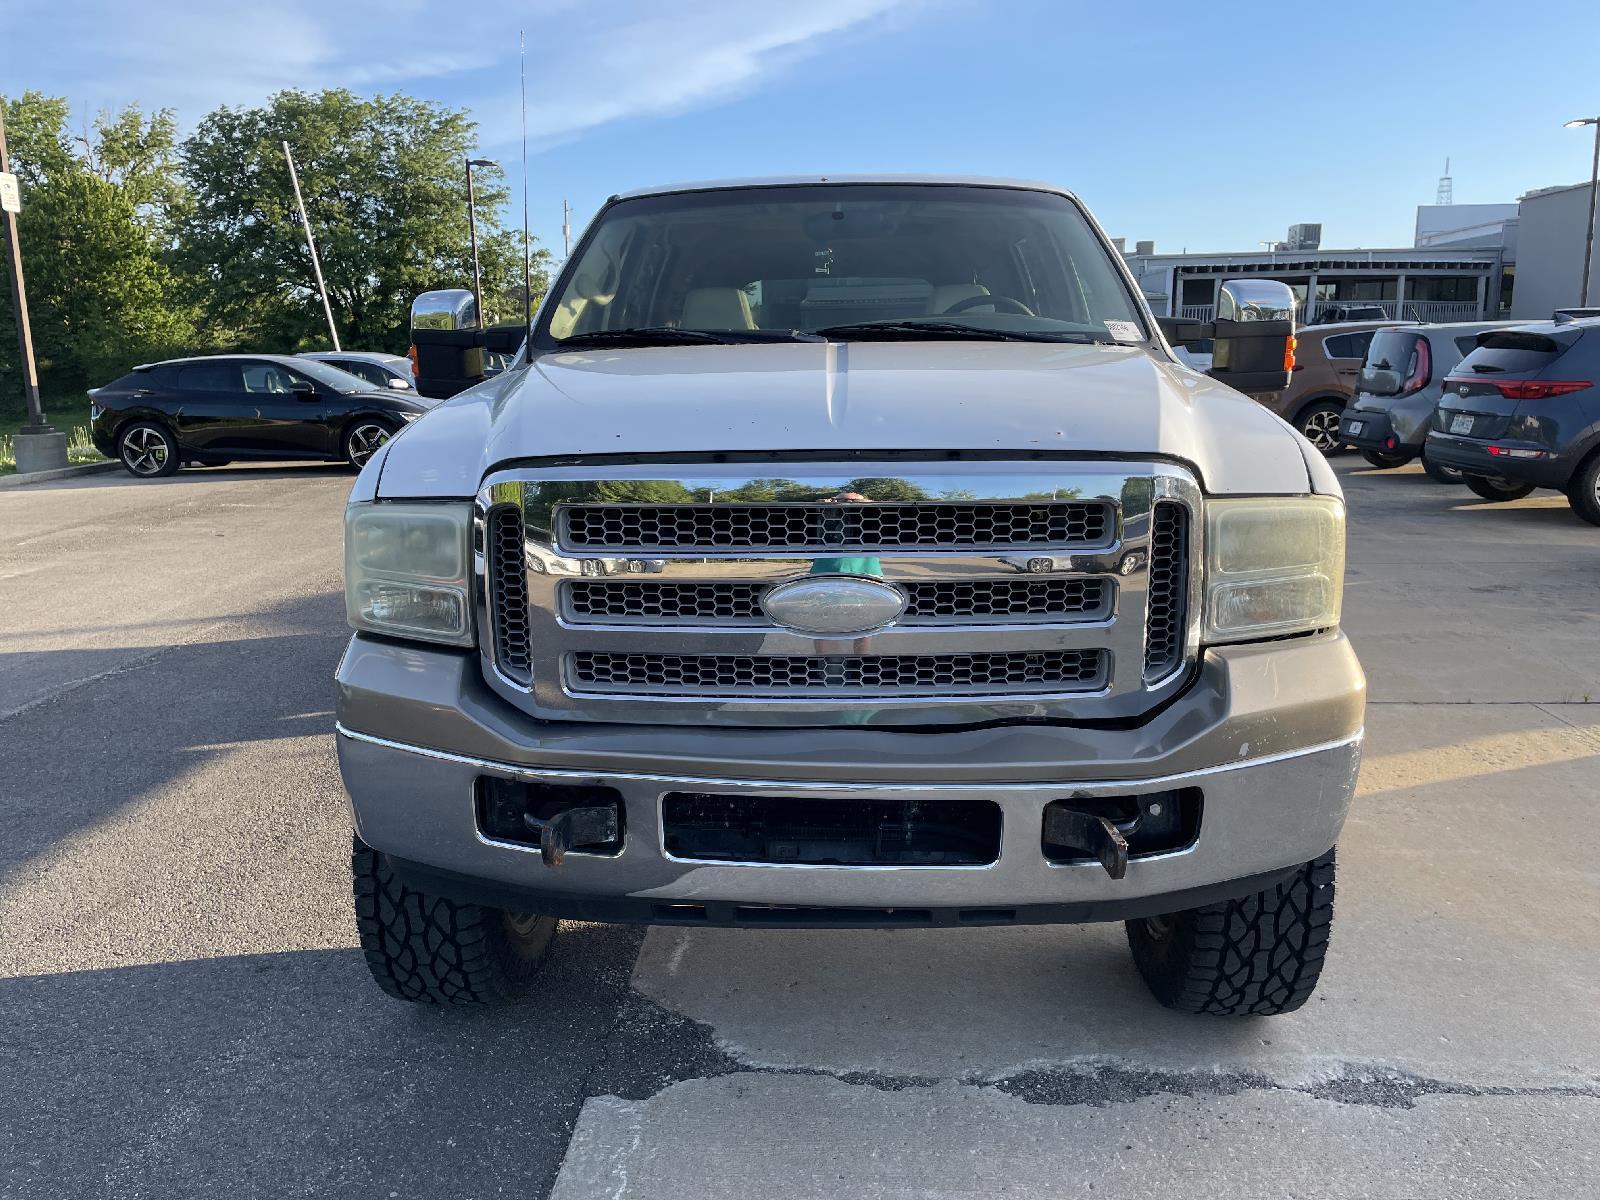 Used 2002 Ford Excursion Limited 4 door for sale in St Joseph MO